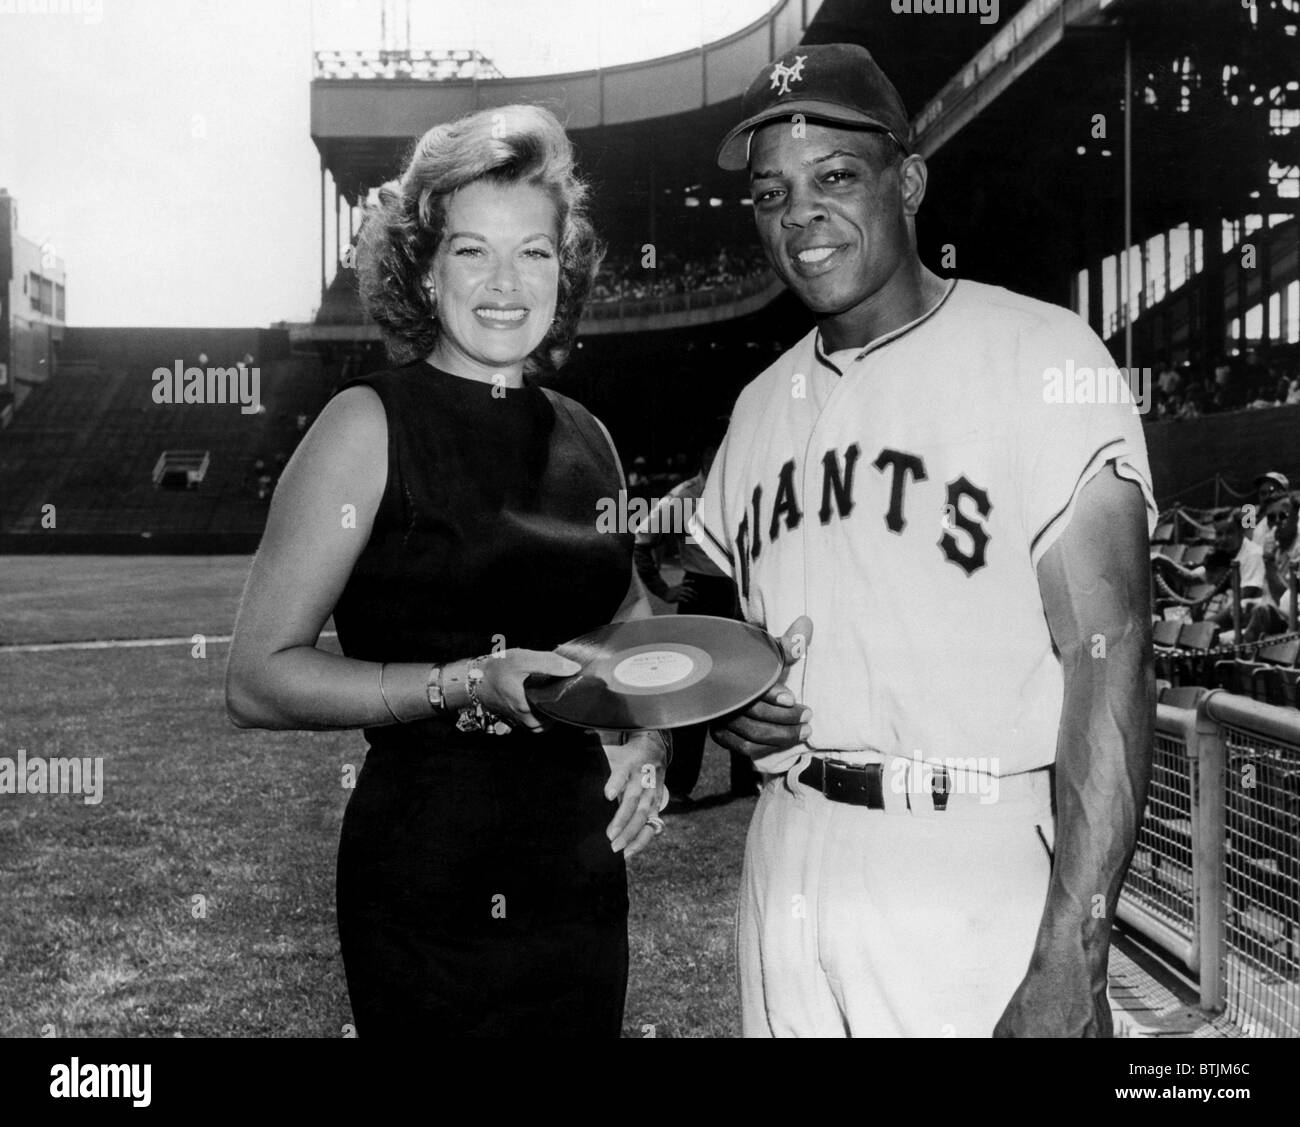 Actress Janis Paige, New York Giants baseball player Willie Mays, 1954. Stock Photo